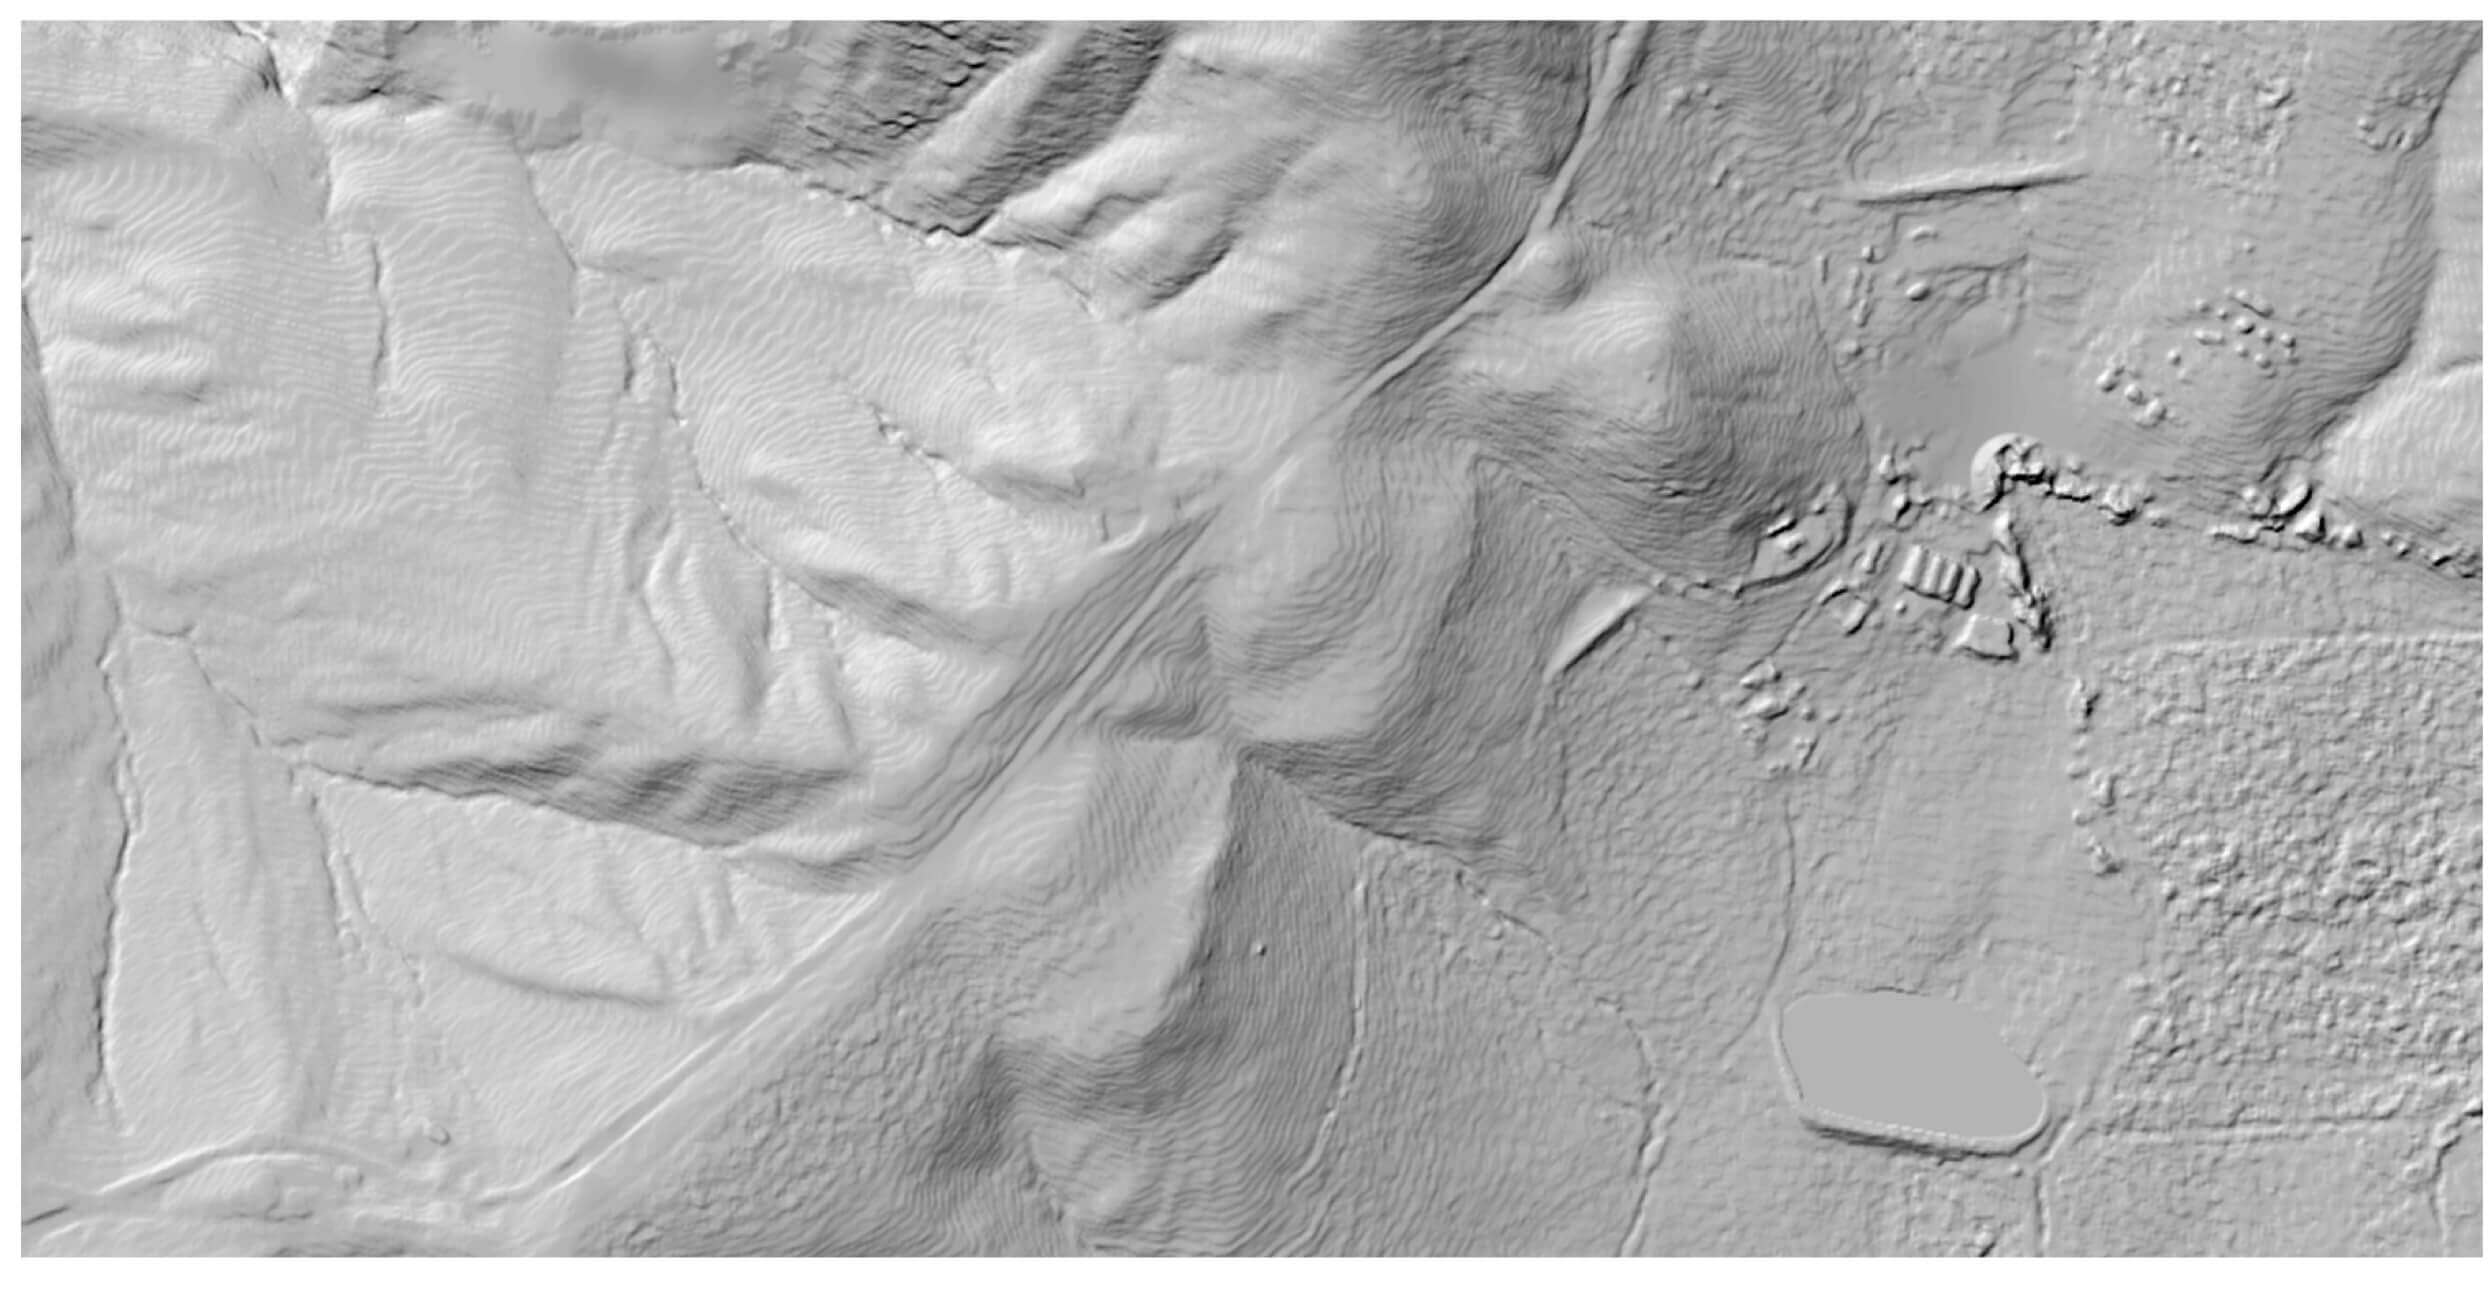 terrain synthesis from digital elevation models